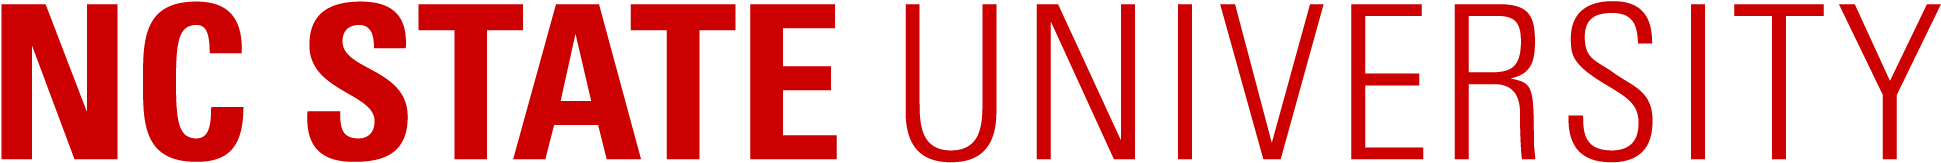 Red Letters Only 4x1, Maximum - Nc State University Png (2160x340)